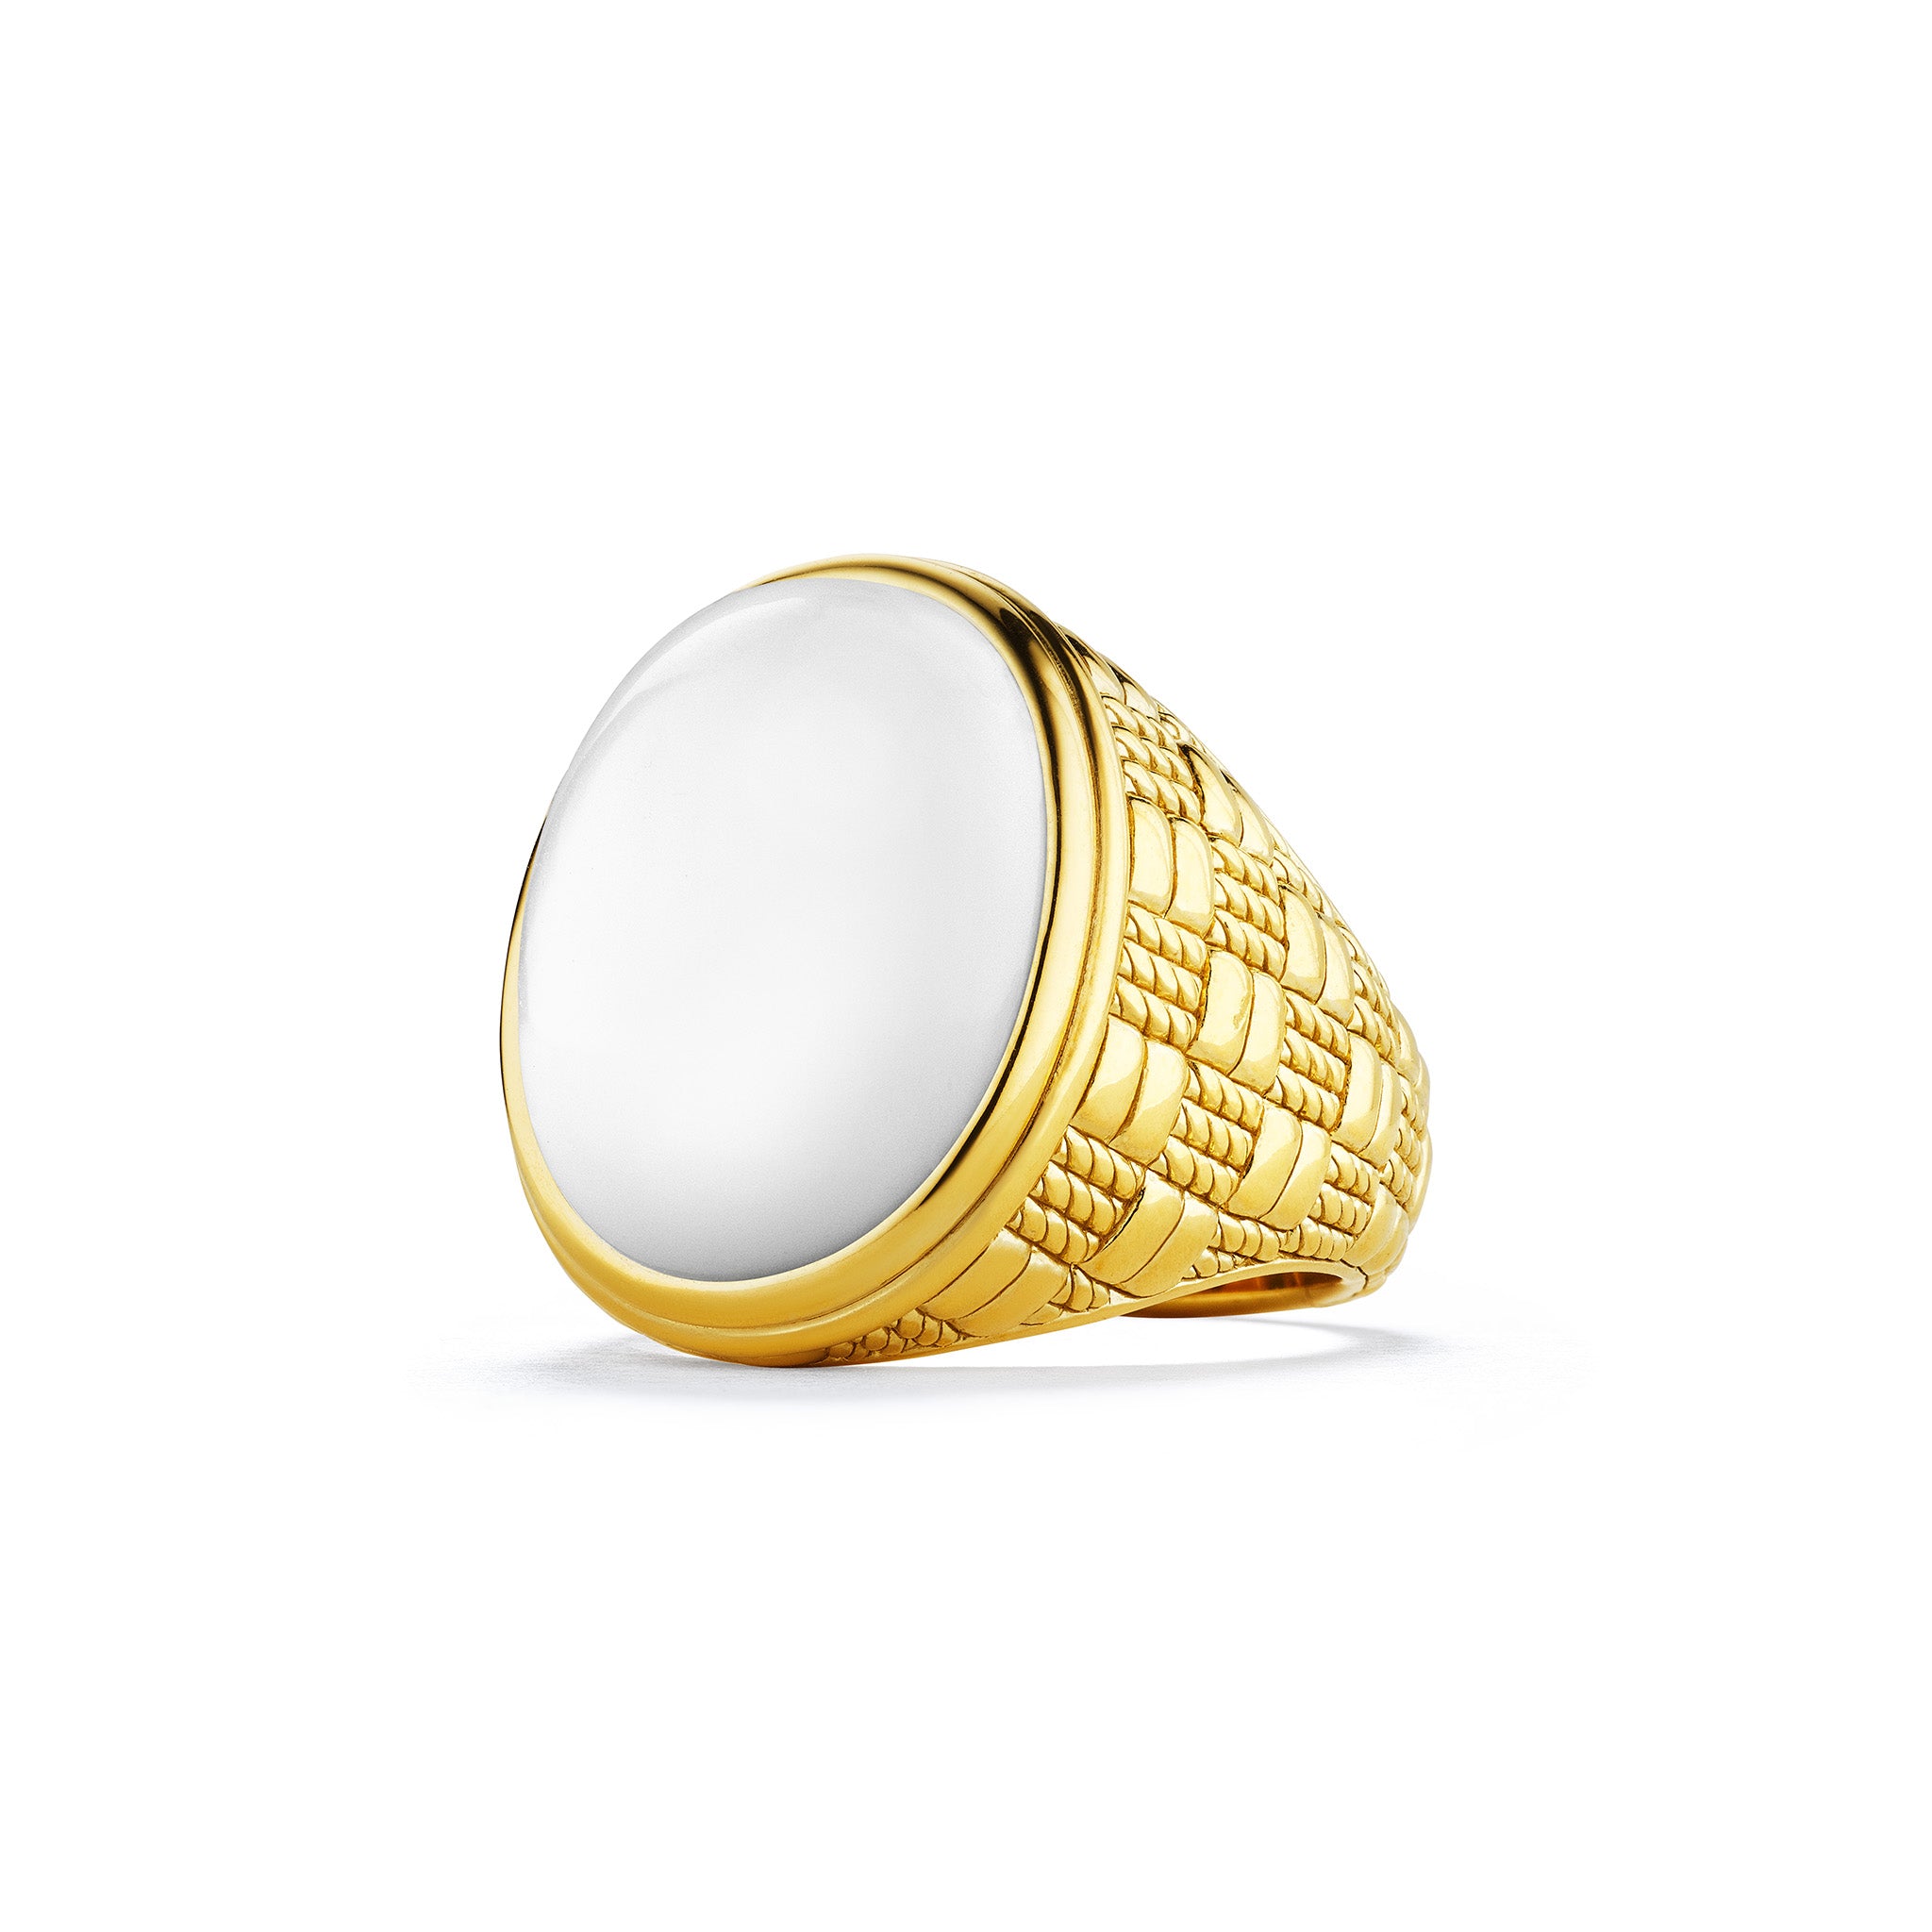 Ocean Reef Ring With White Agate In 18K Gold Vermeil